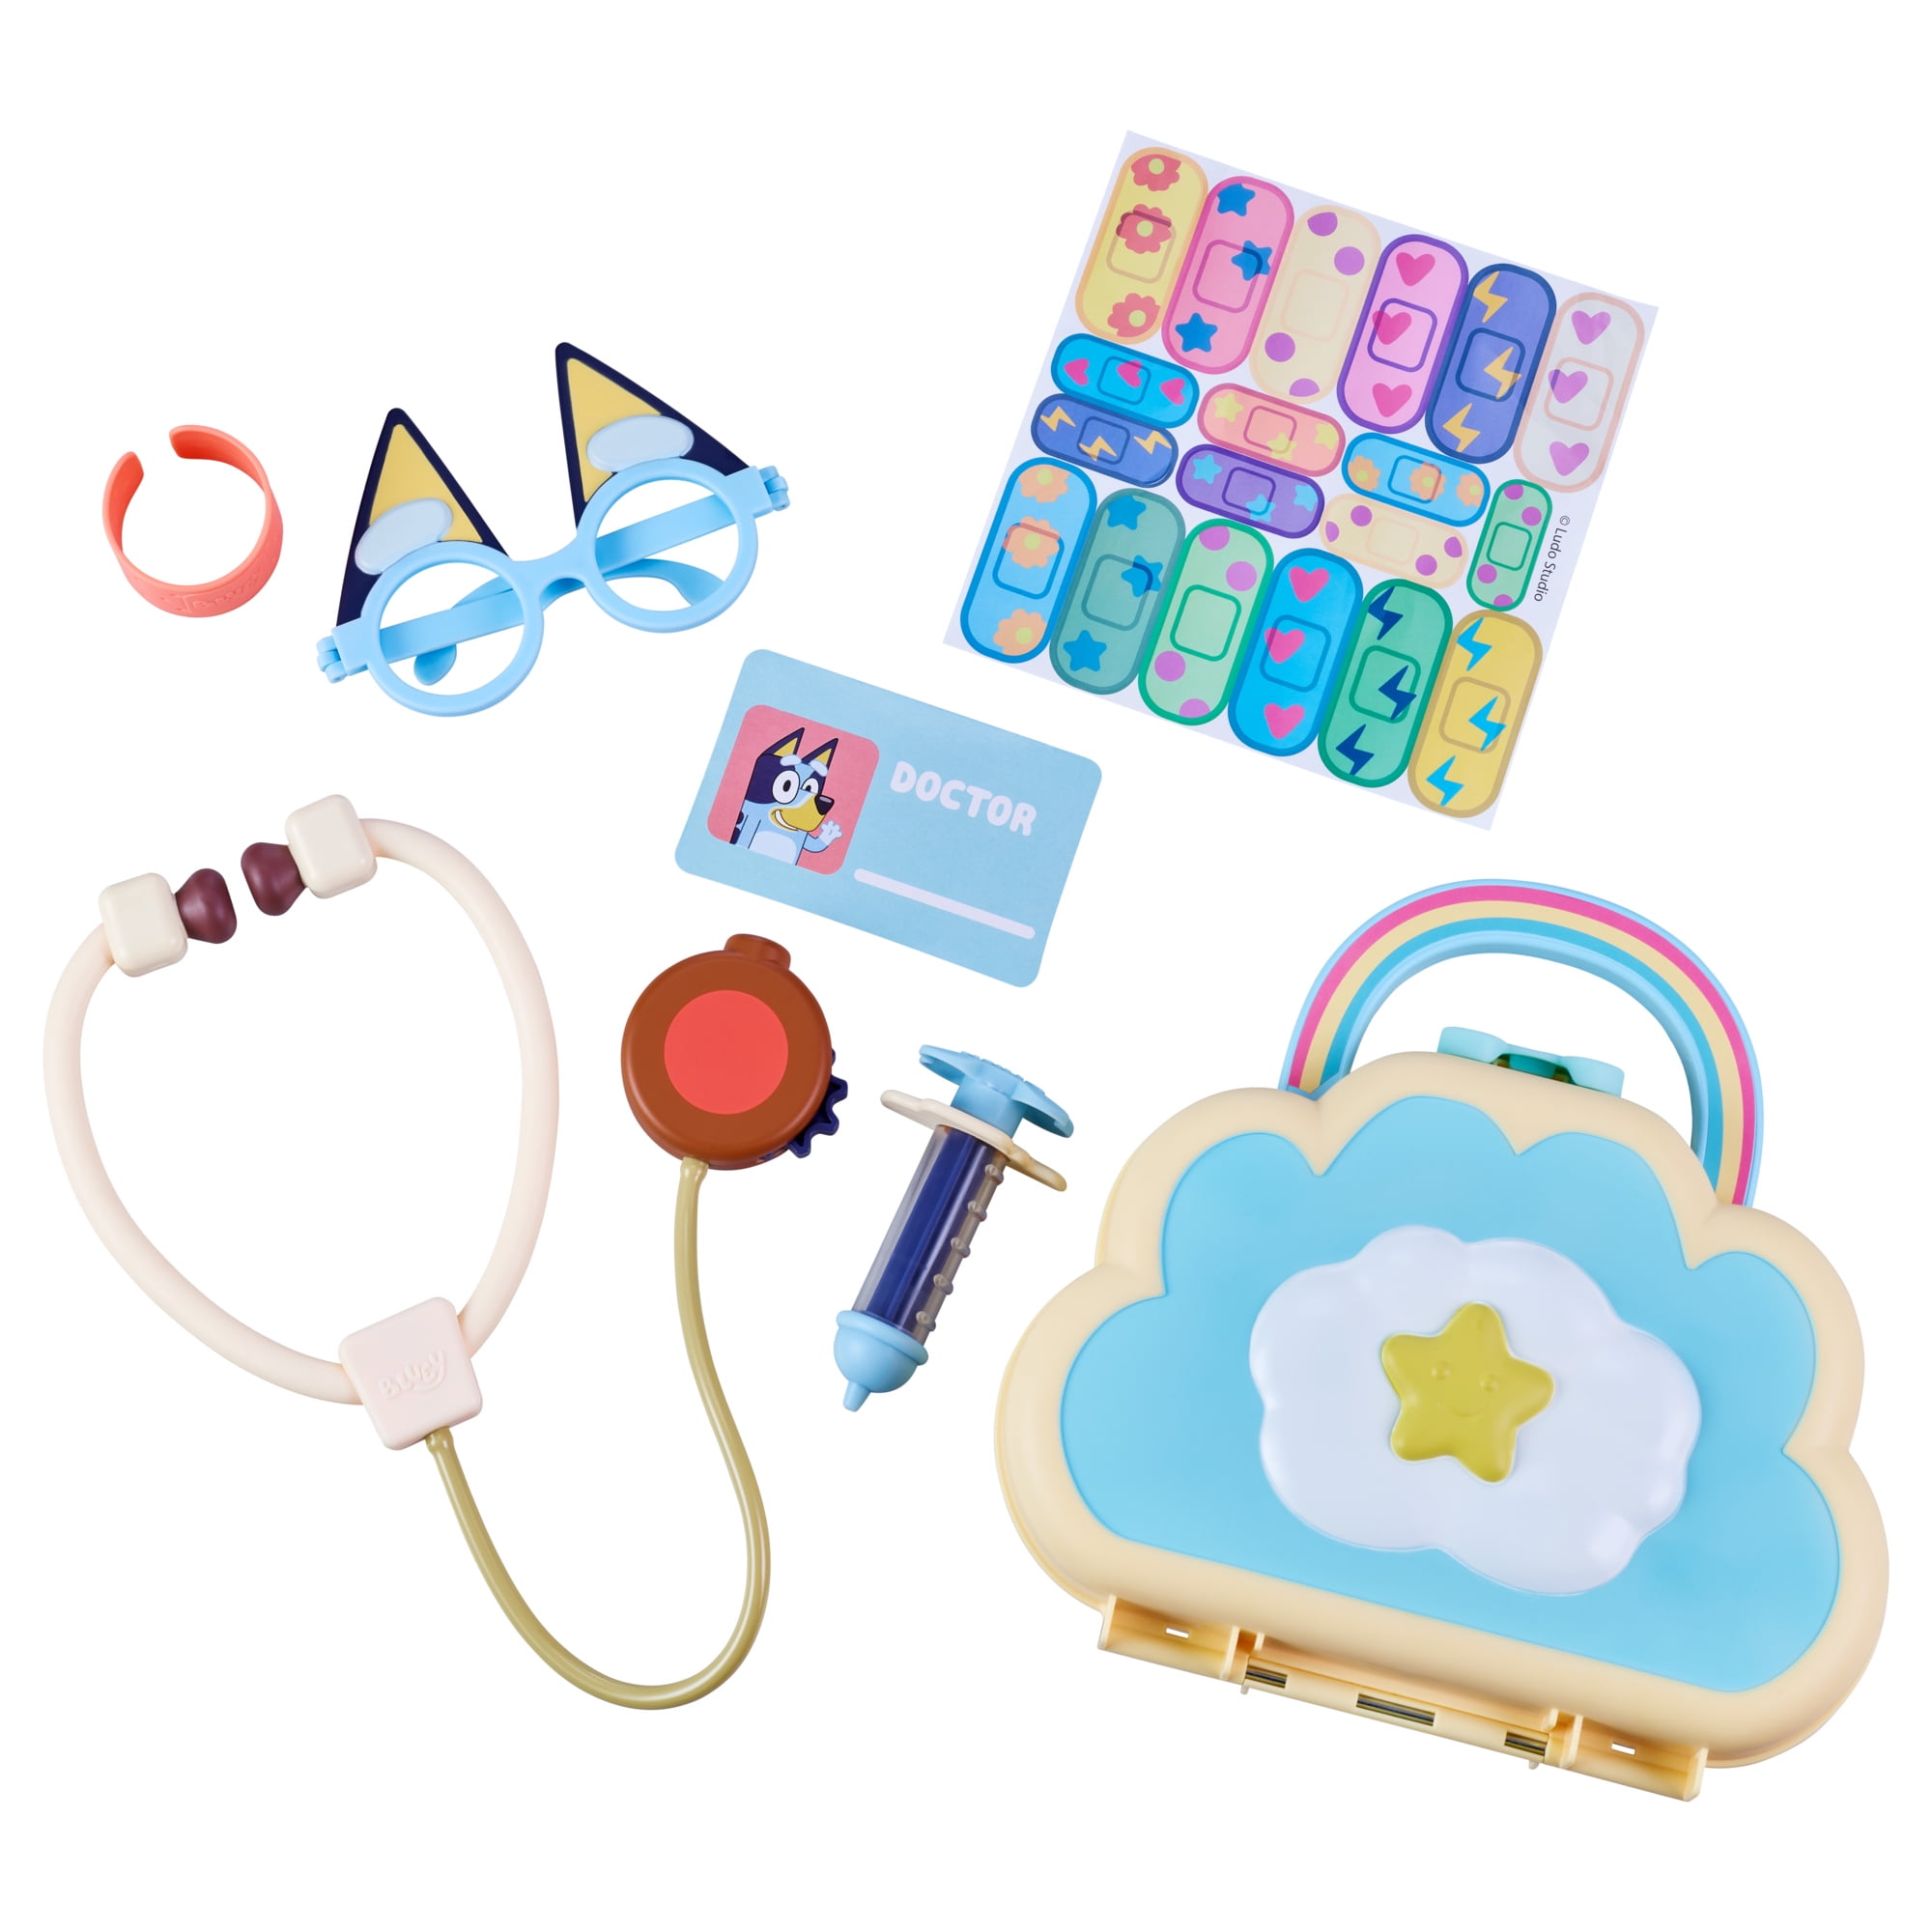 Bluey Cloud Bag Doctor's Set, Doctor Check Up Set, Toy Doctor's Playset with 7 Play Pieces, Stethoscope, Syringe, toy Bandage, Stickers, and more , Preschool, Toys for Kids, Ages 3+